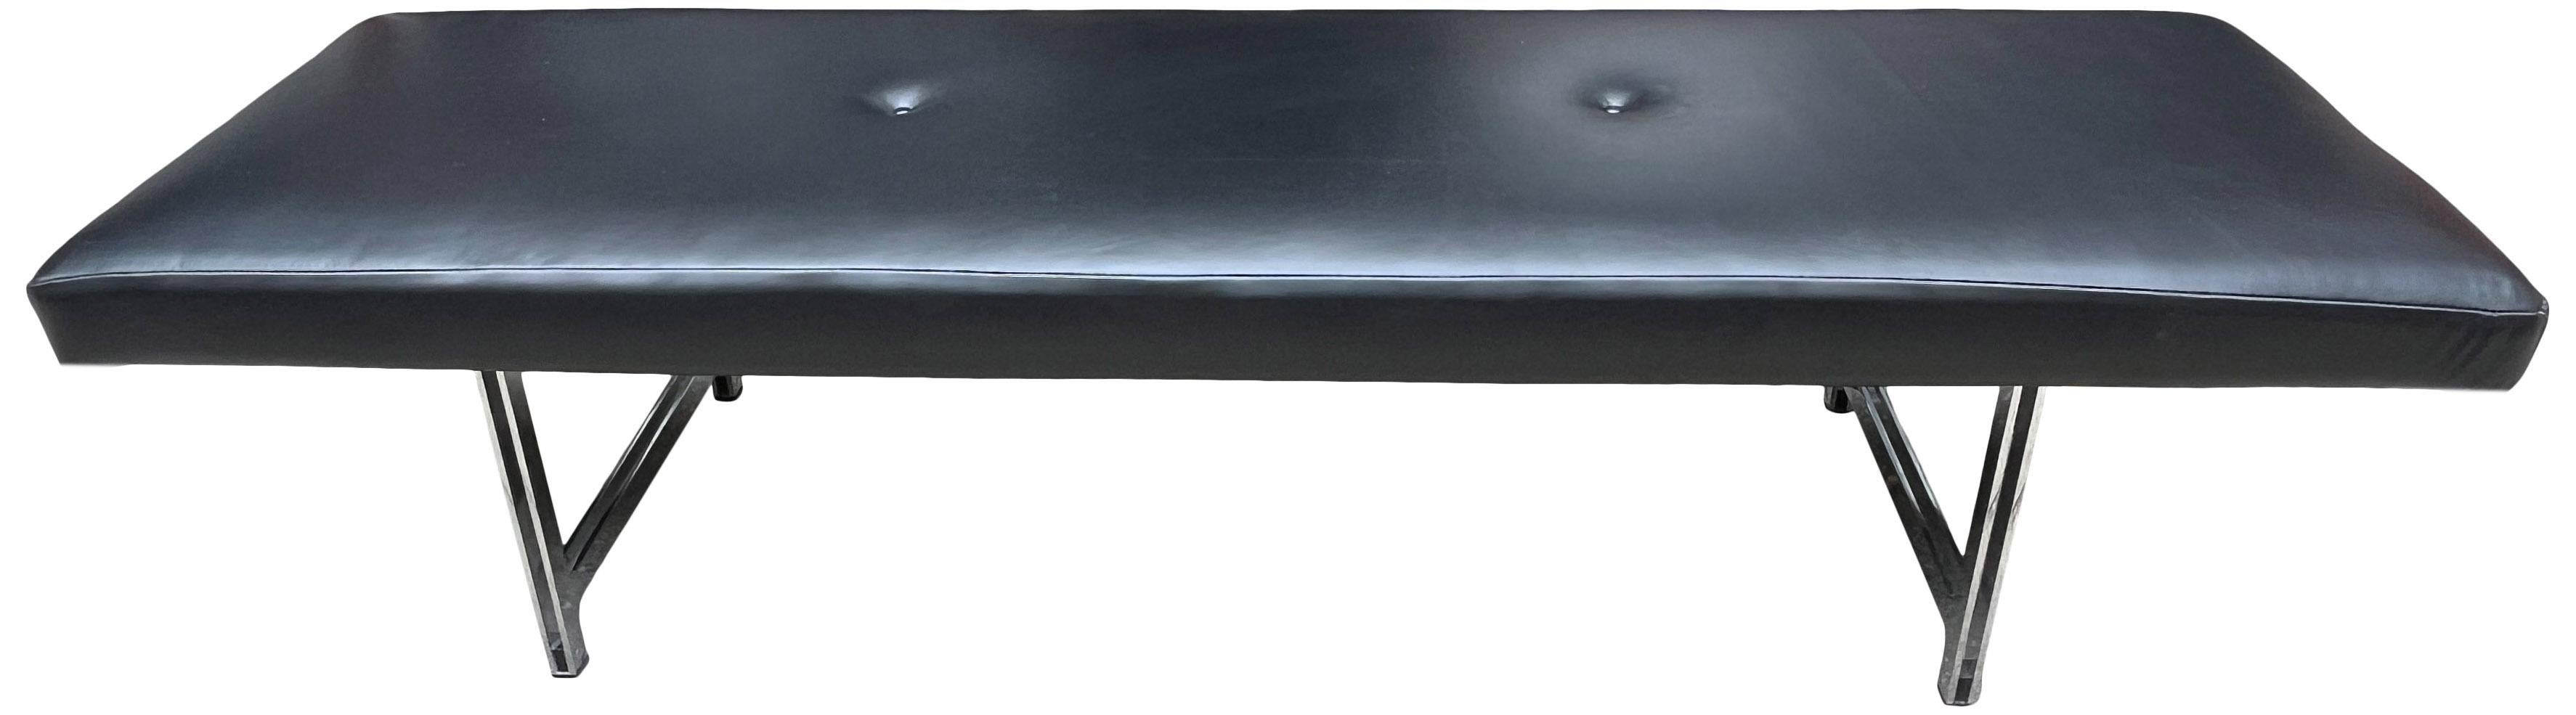 Walter Knoll Bench in Black Leather Crome Base  2